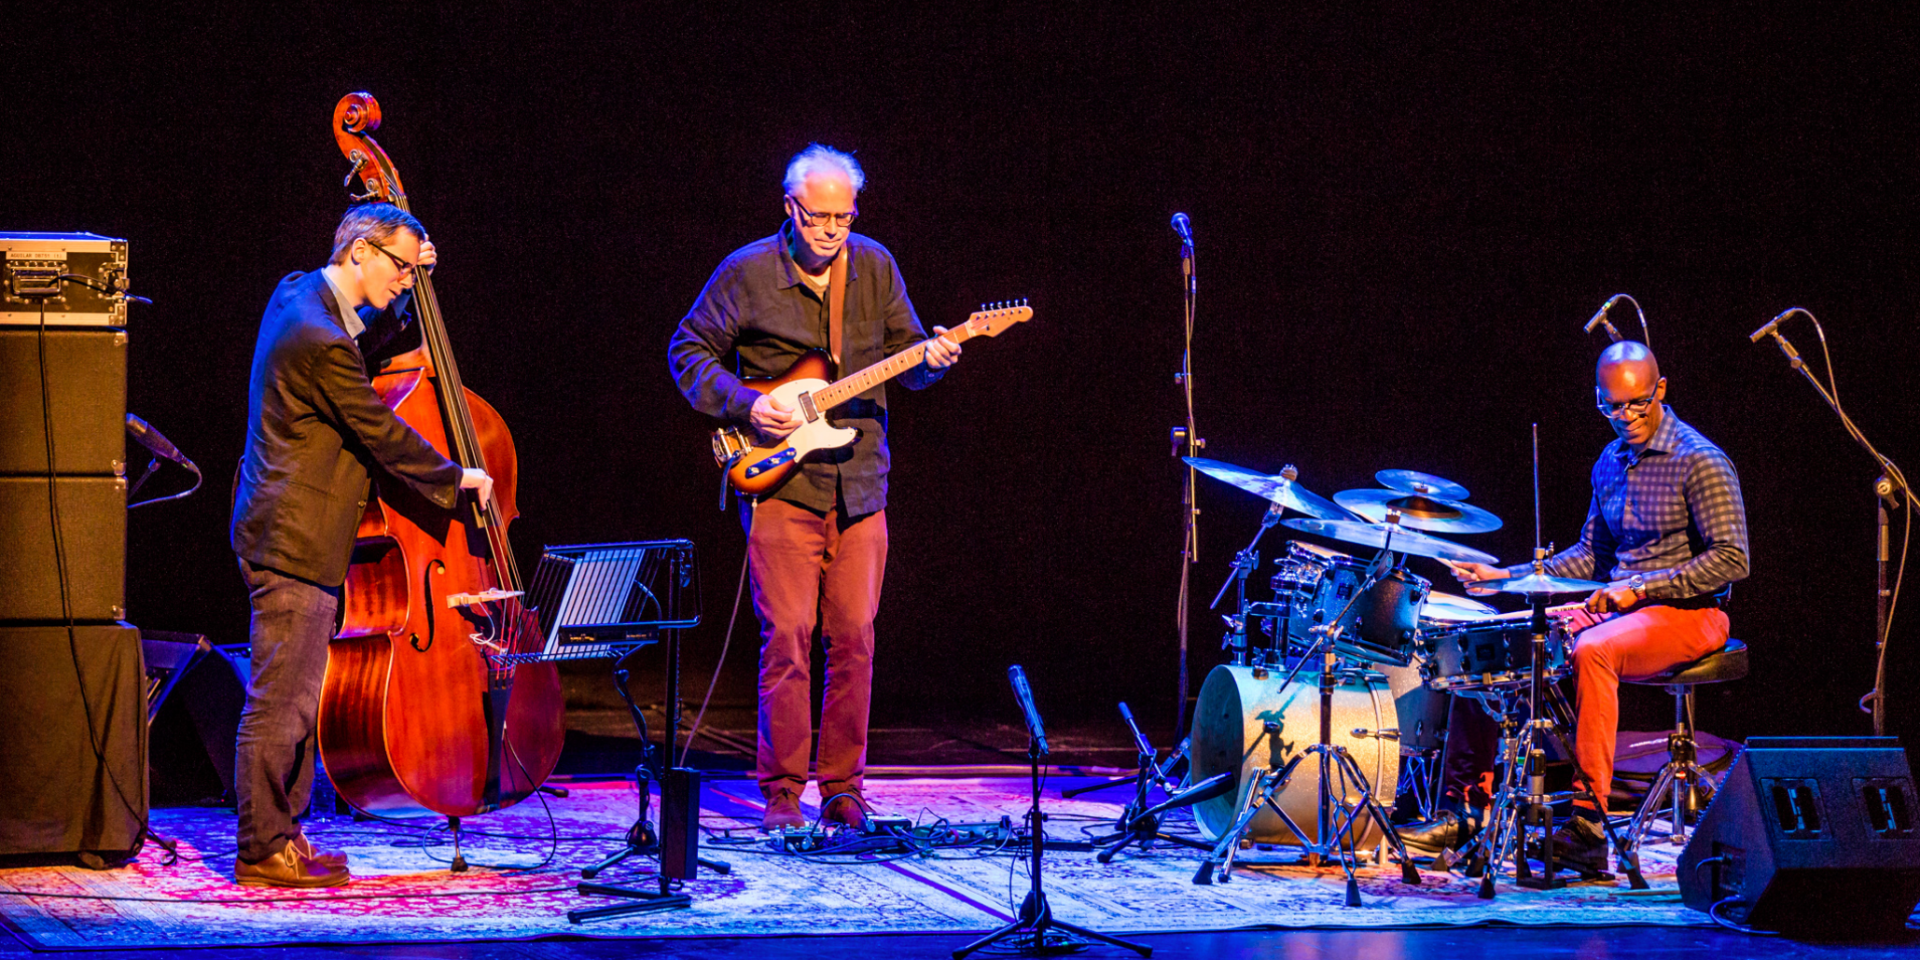 The Bill Frisell Trio puts on a riveting, spectacular show at debut Singapore performance for SIFA 2019 – gig report